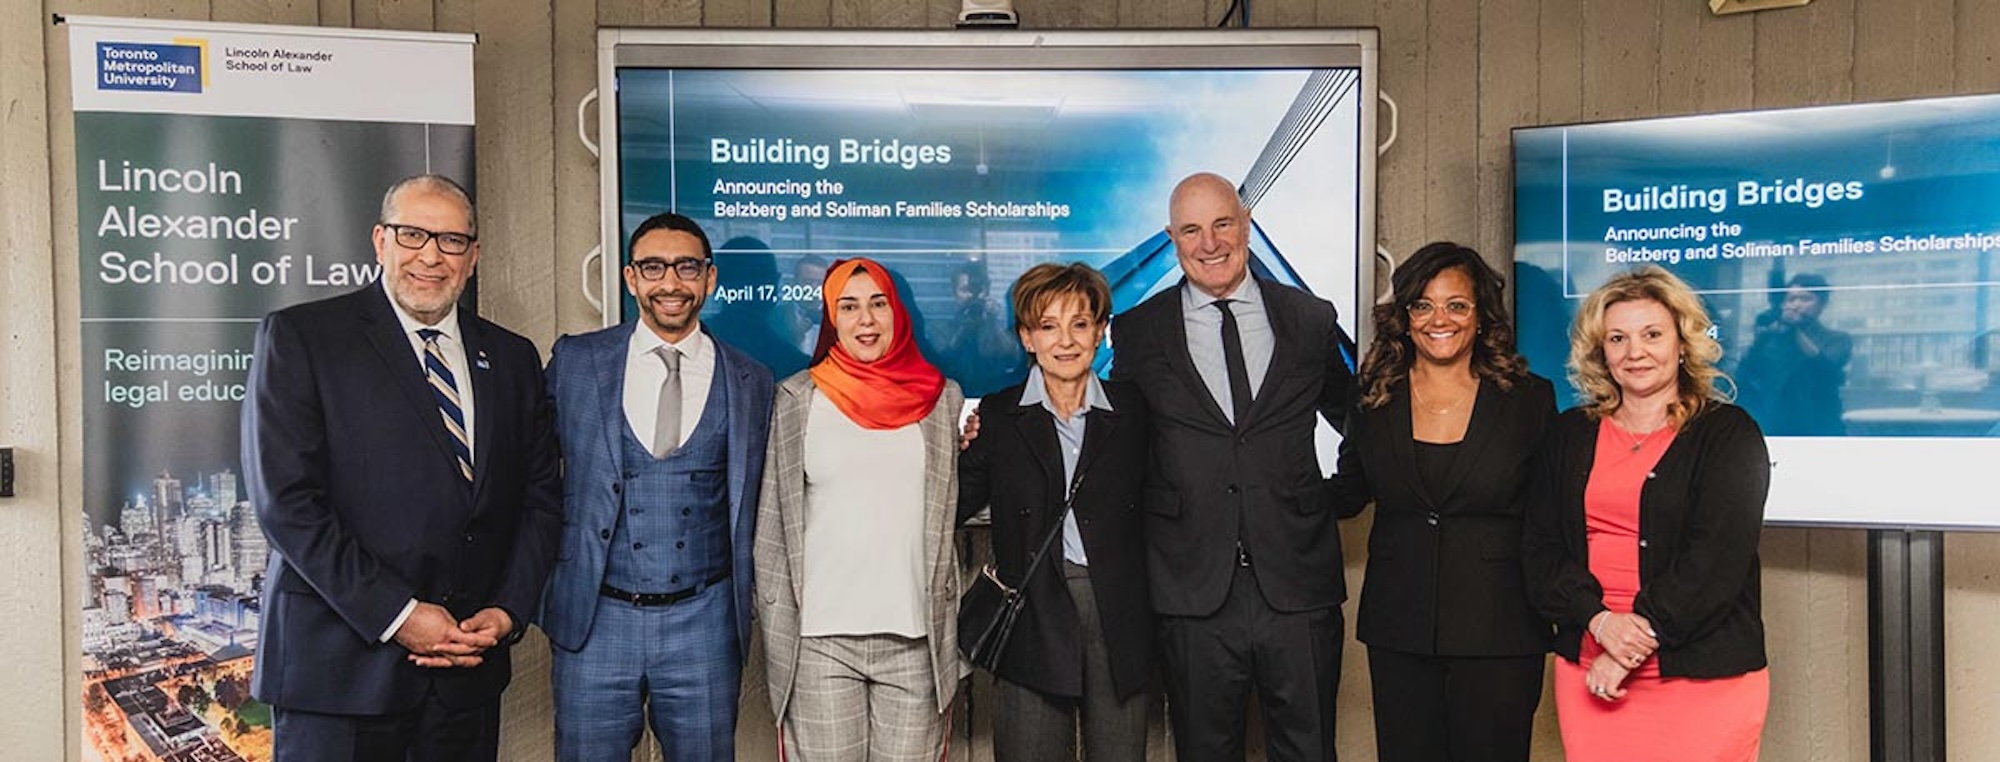 From left: Mohamed Lachemi, Walied Soliman, Deena Soliman, Lynn Belzberg, Brent Belzberg, Donna Young, and Roberta Iannacito-Provenzano